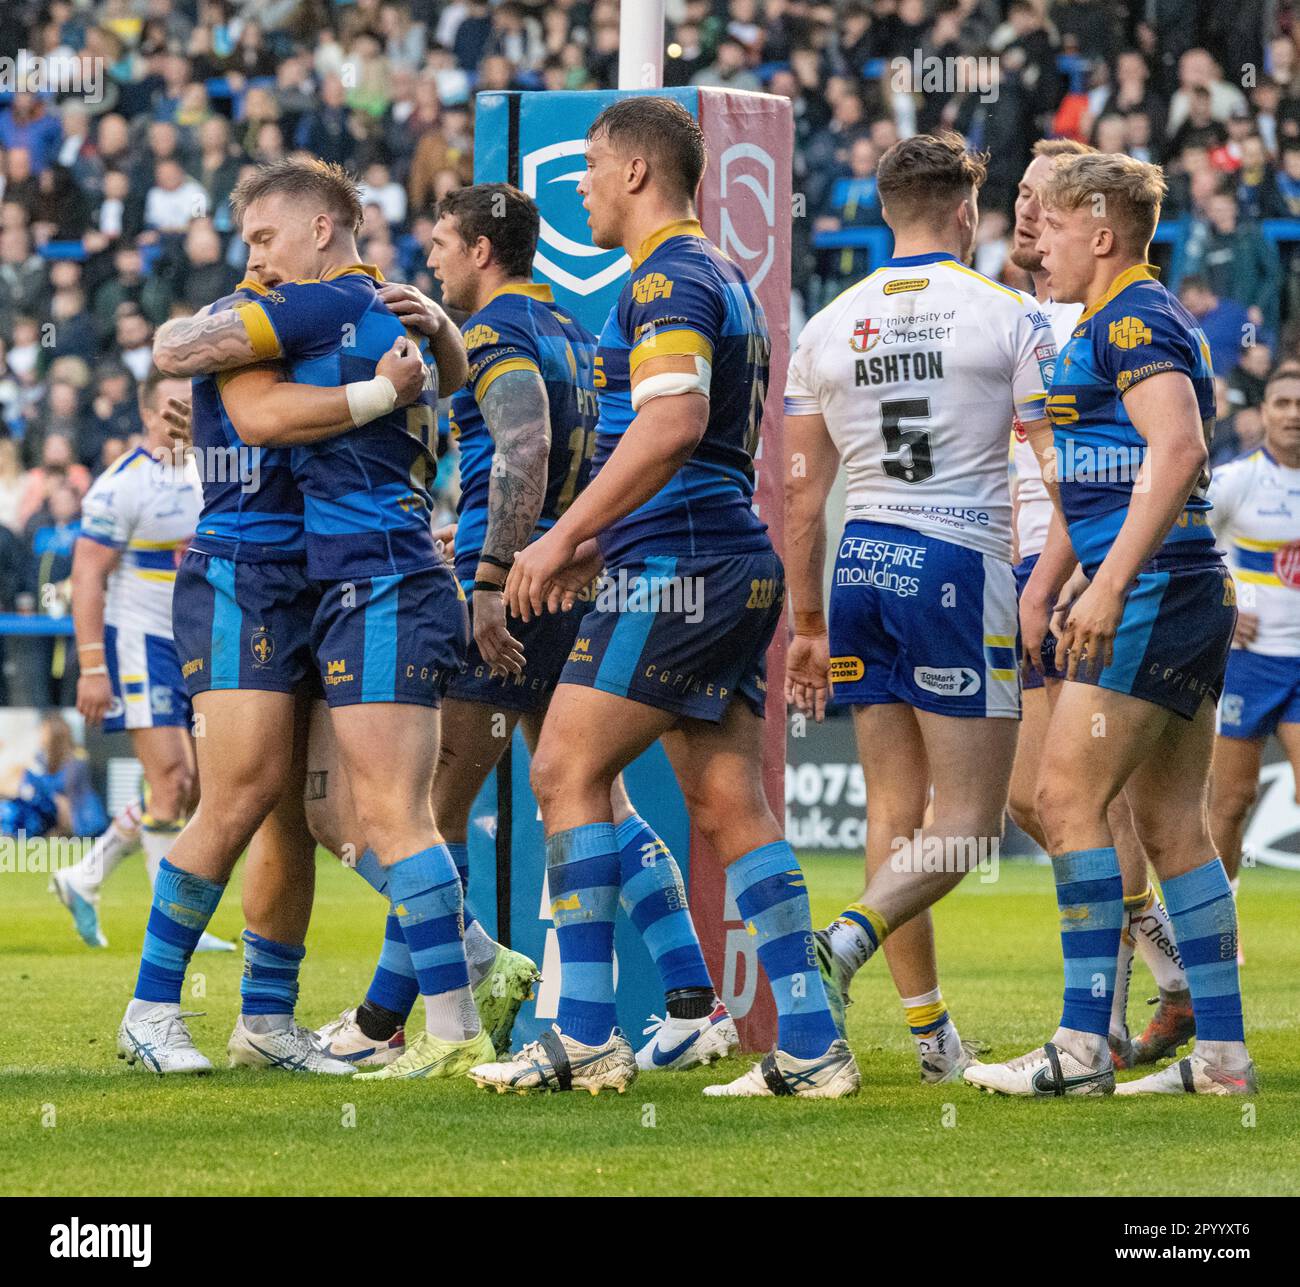 Warrington, Cheshire, England 5th May 2023. Wakefield celebrates Morgan Smith try, during Warrington Wolves Rugby League Football Club V Wakefield Trinity Rugby League Football Club at the Halliwell Jones Stadium, the Betfred Super League. (Credit Image: ©Cody Froggatt/Alamy live news) Stock Photo